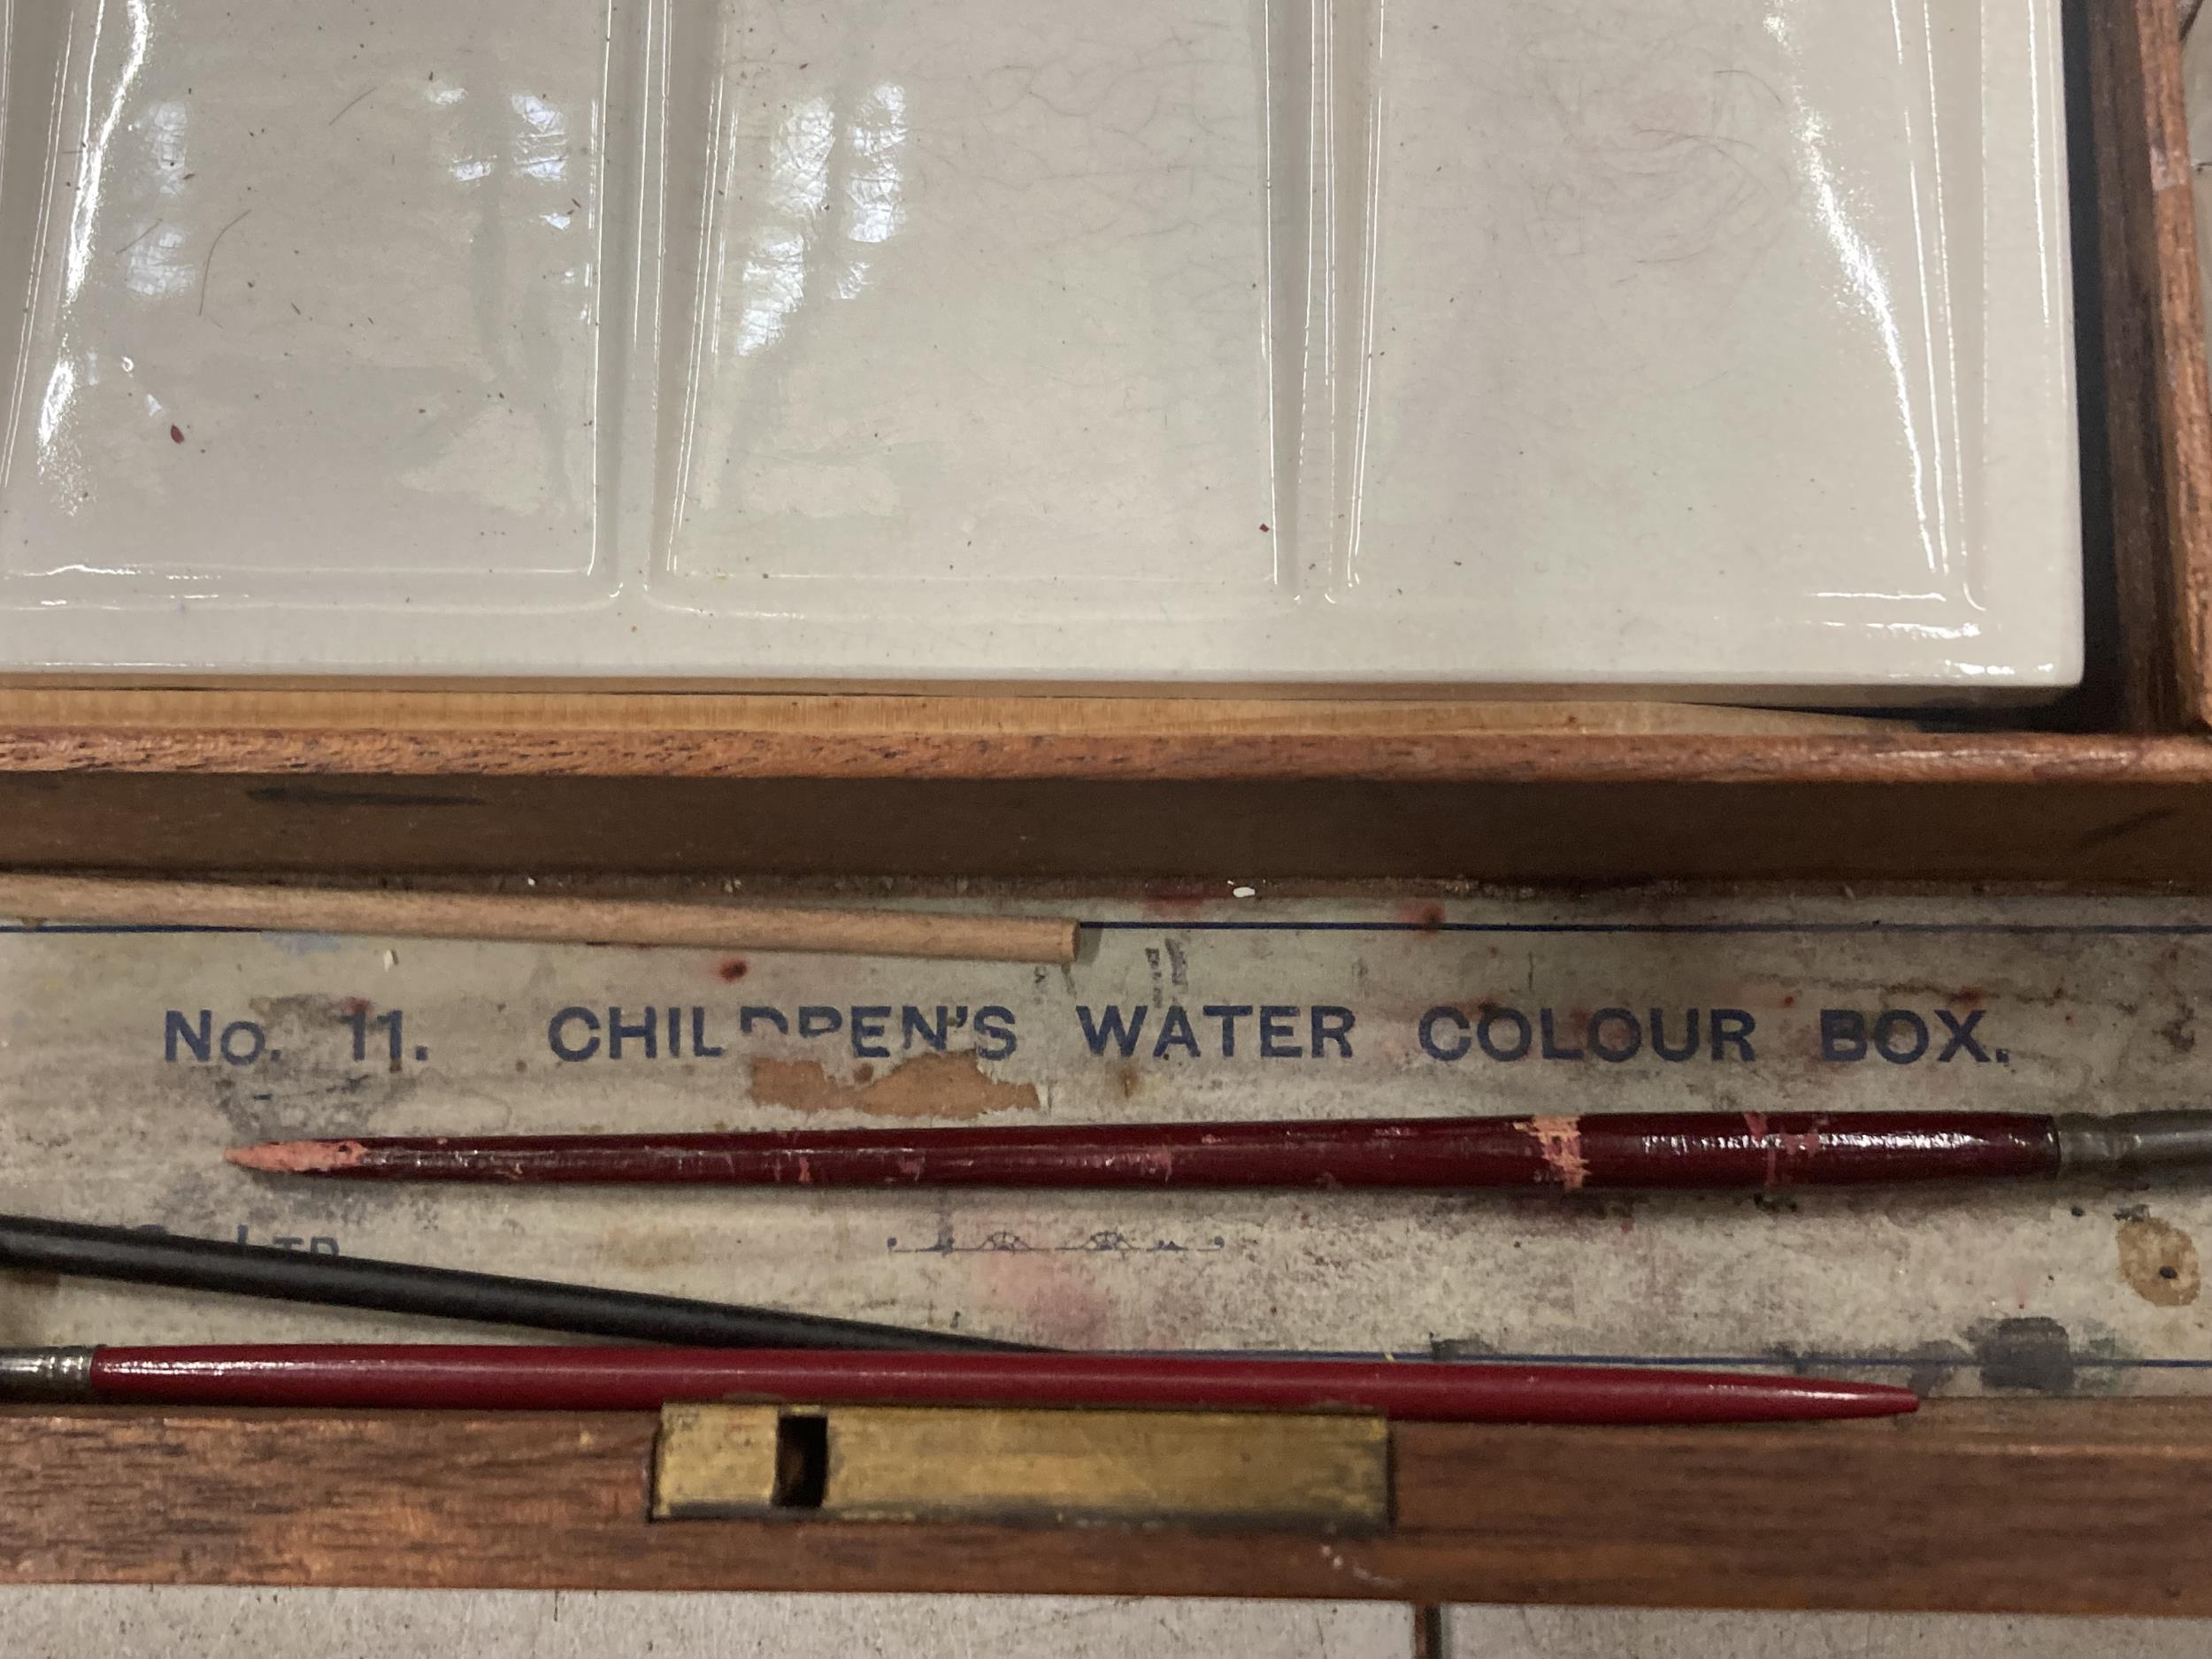 A REEVES AND SONS LIMITED CHILDREN'S WATER COLOUR BOX WITH ACCESSORIES - Image 3 of 5